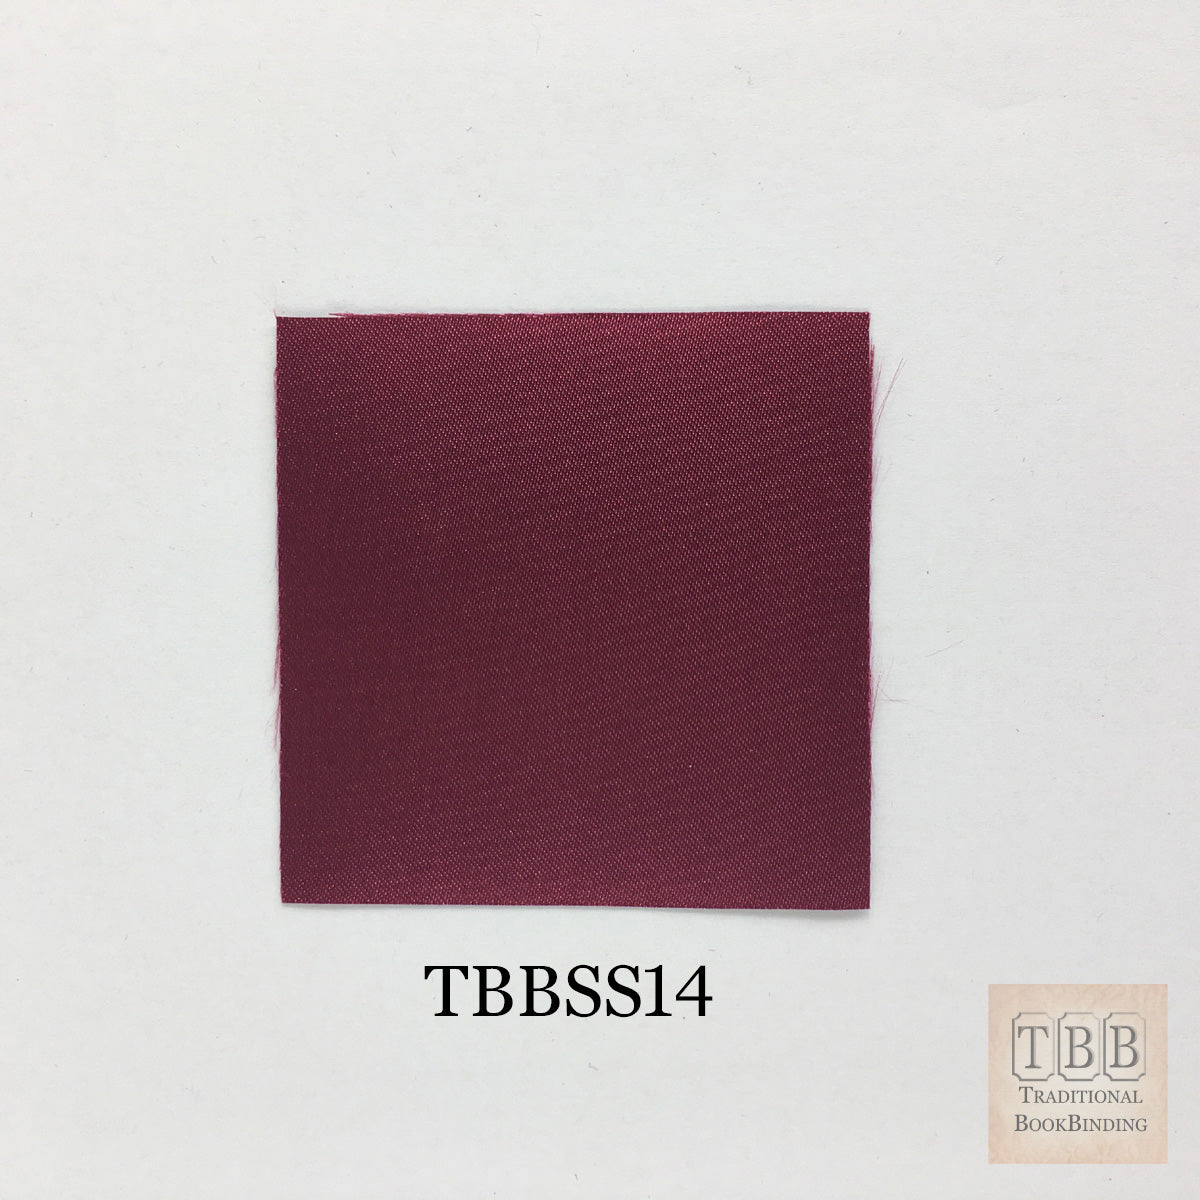 Silk Finish Buckram- Durable bookbinding cloth with paper backing- TBBSS14